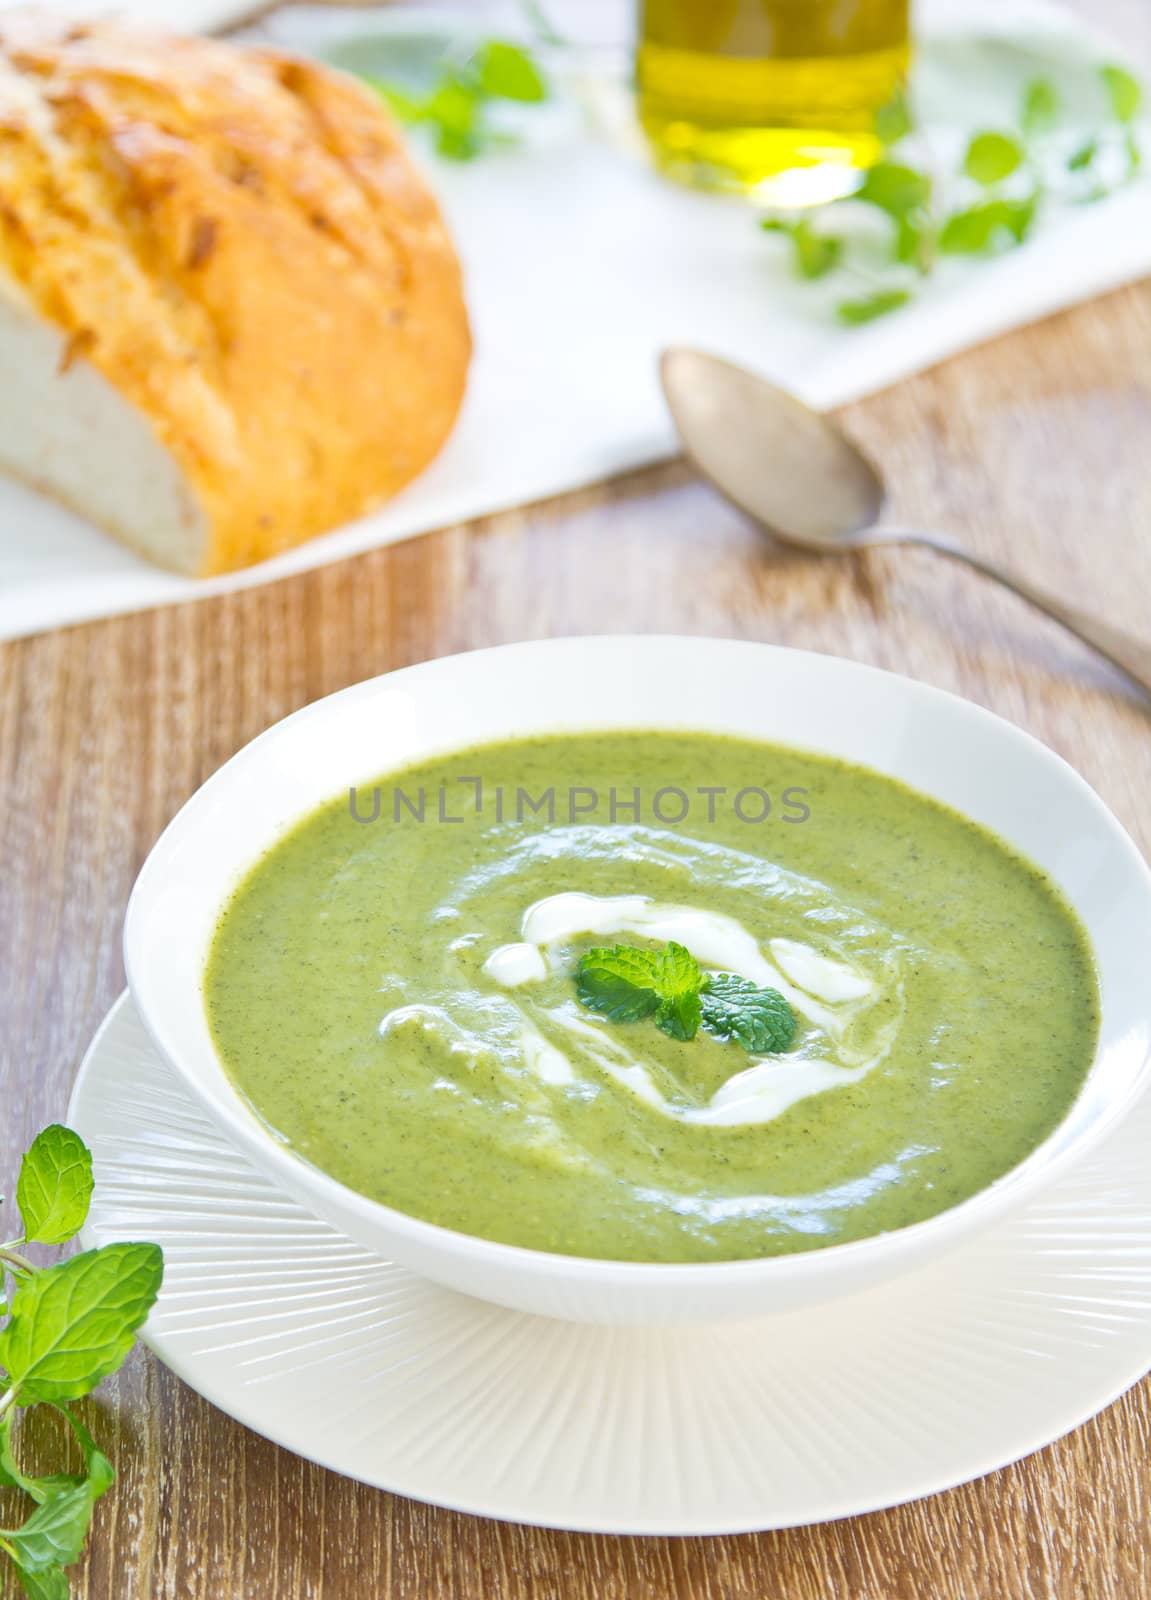 Pea,mint and celery soup by vanillaechoes